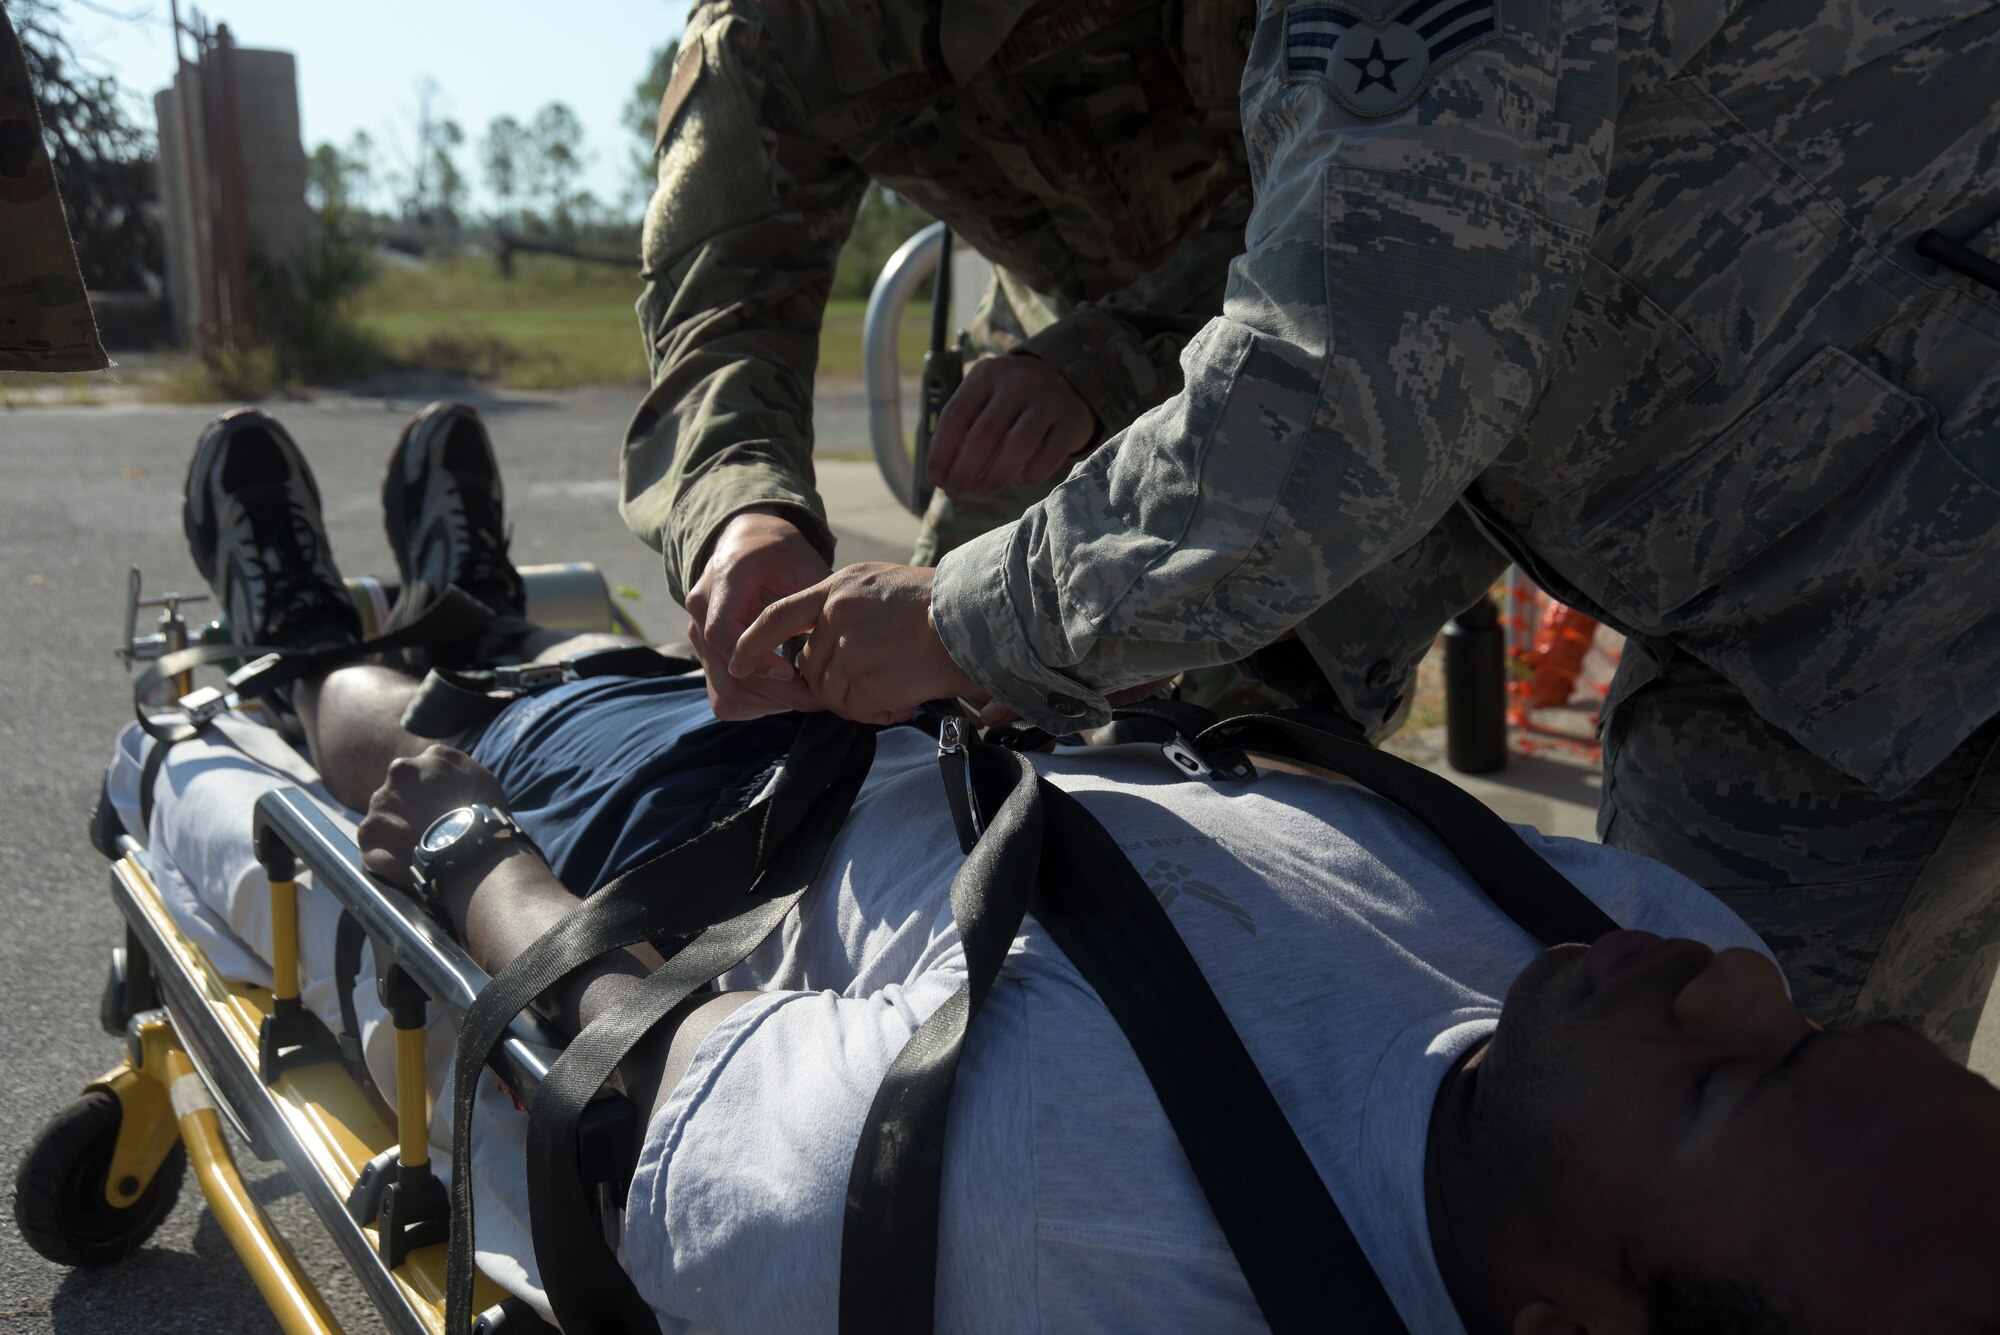 Airman 1st Class Brian Nguyen, left, and Senior Airman Deliz Aguilera, right, 325th Operational Medical Readiness Squadron Ambulance Services Department medics secure a patient during an emergency medical response exercise Oct. 4, 2019, at Tyndall Air Force Base, Florida. Patients in need of medical transportation are seat belted safely to a stretcher and loaded into an ambulance to provide the safest and fastest transit to the proper facility. (U.S. Air Force photo by Staff Sgt. Magen M. Reeves)